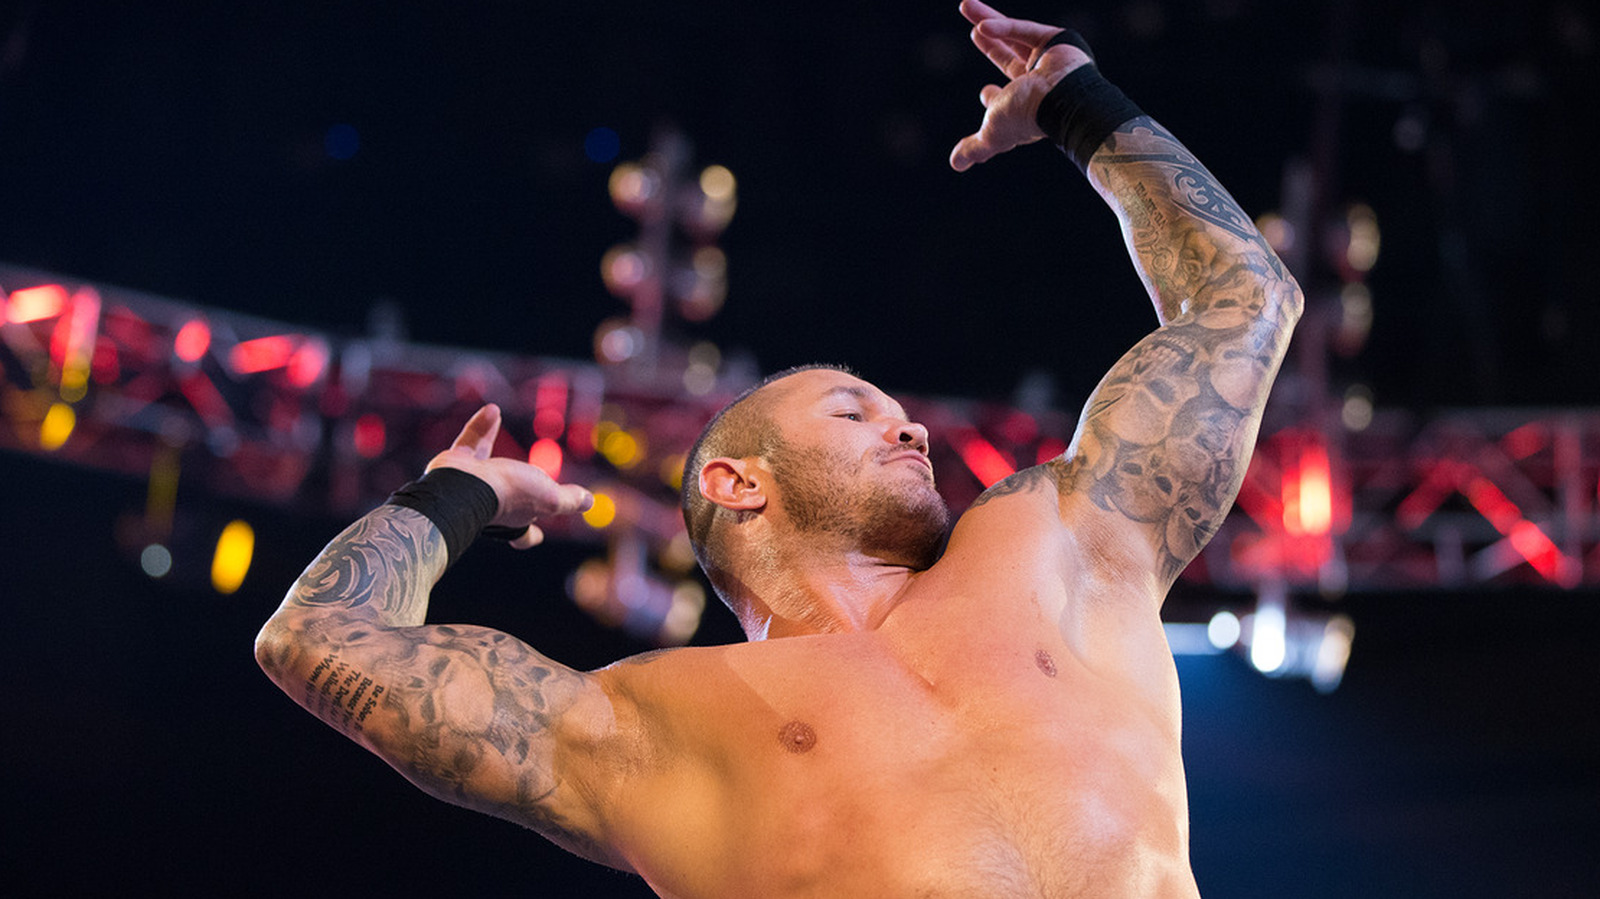 Randy Orton got visibly emotional before doing signature pose on WWE Raw  return